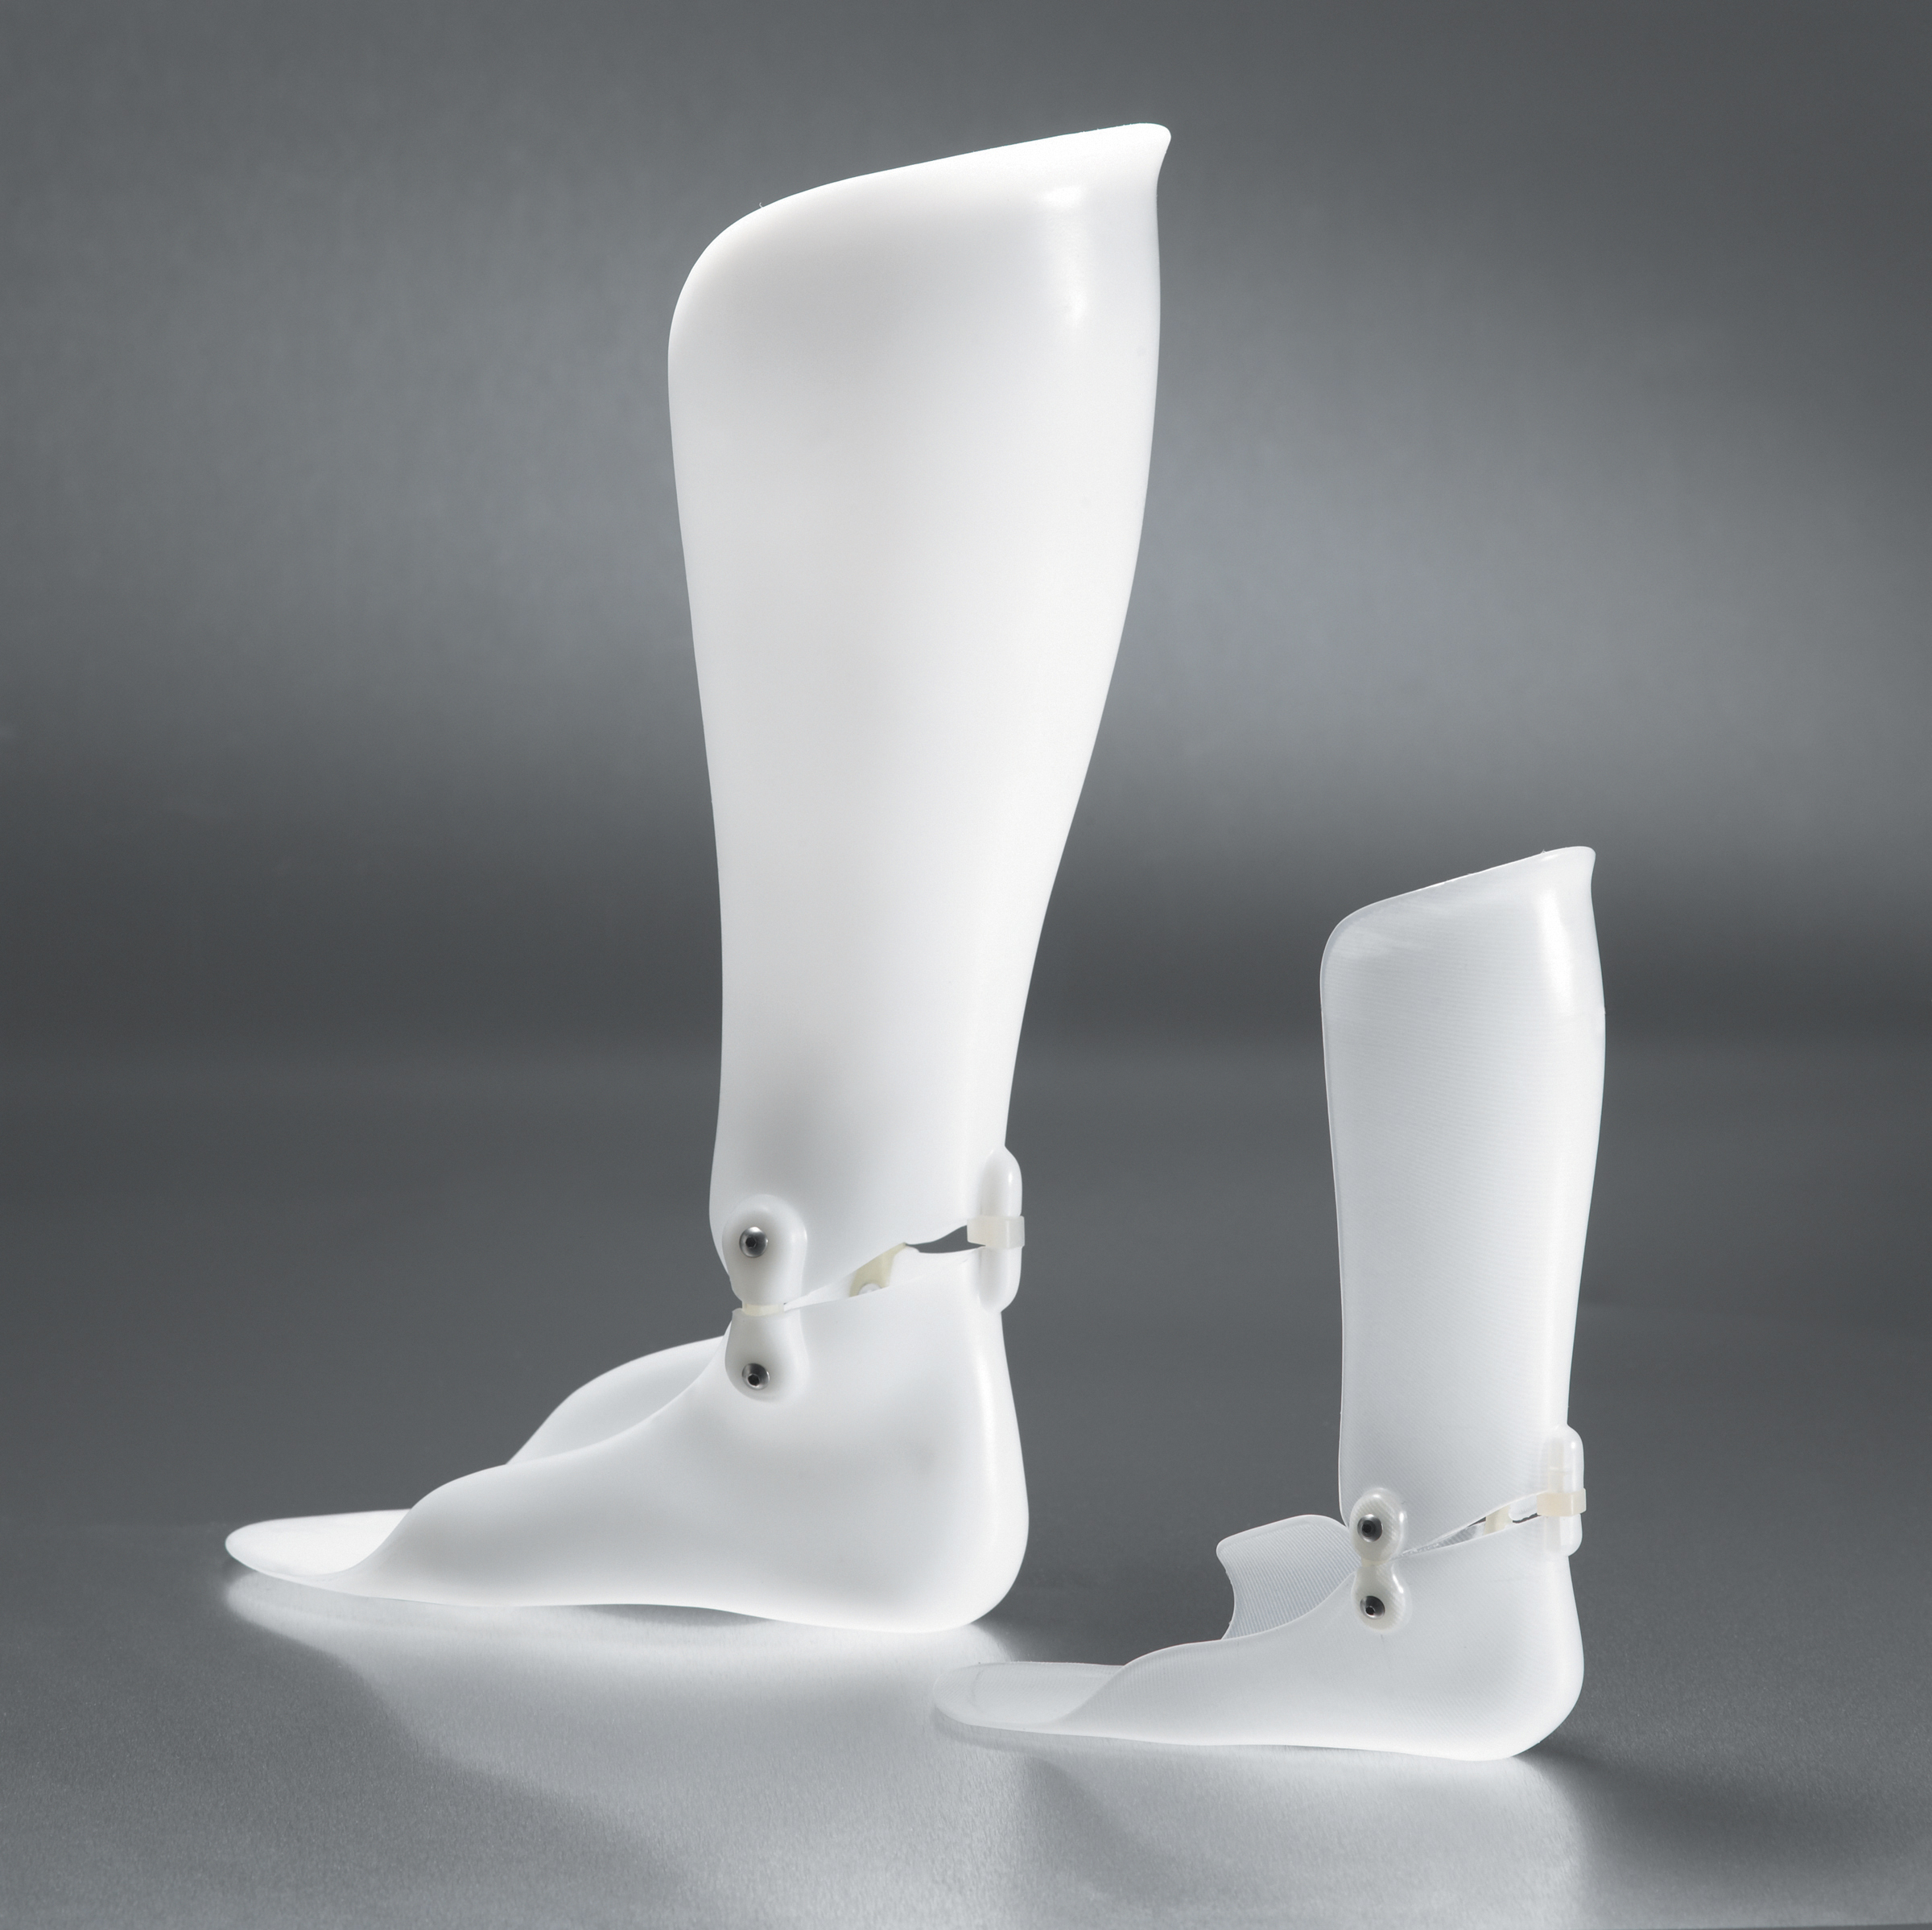 Ankle-Foot Orthosis (AFO): How to Measure and Wear Properly 